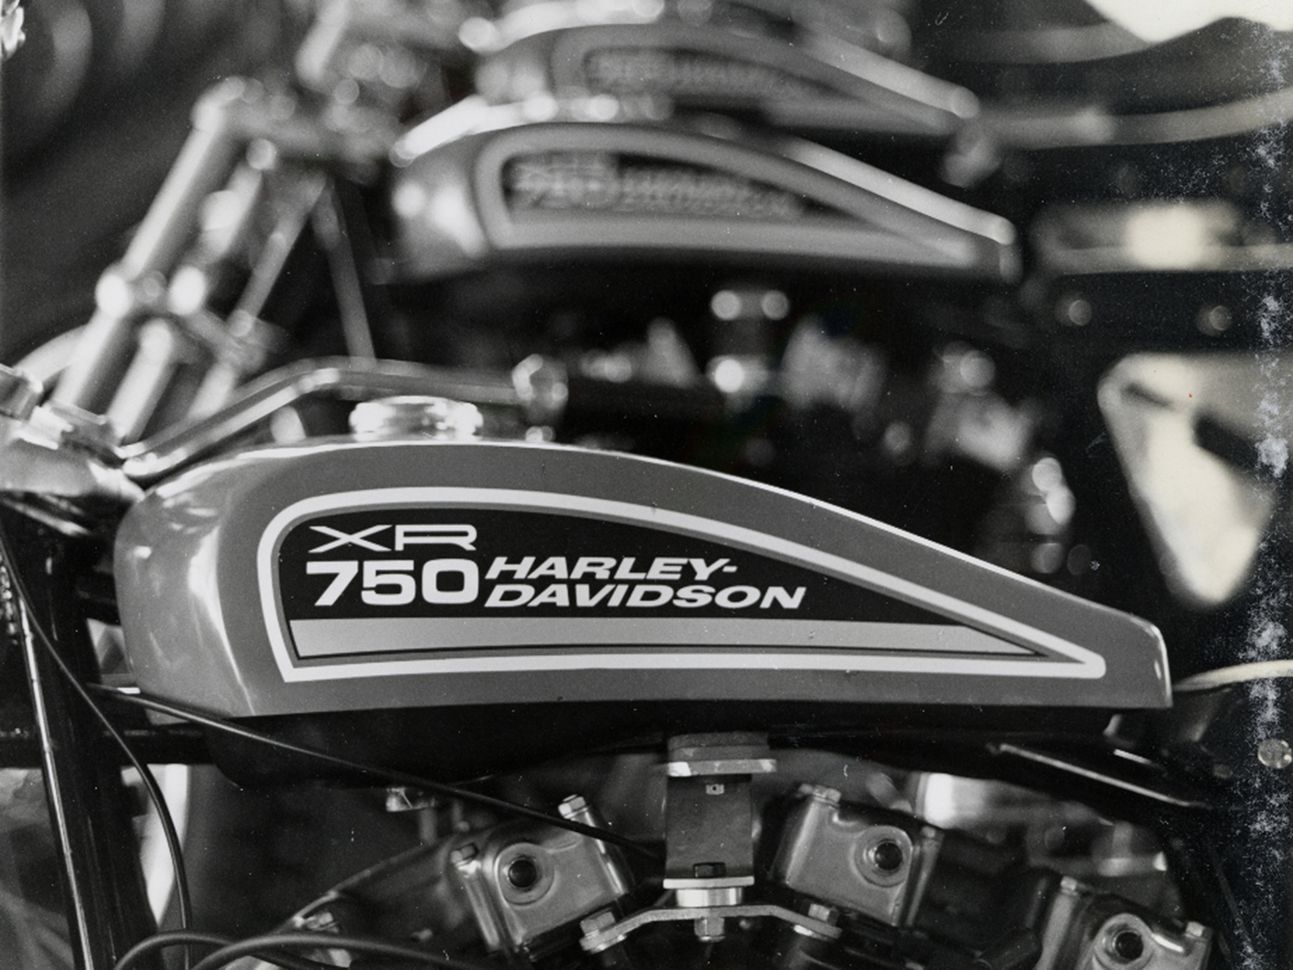 Celebrating 50 Years of the Harley-Davidson XR750